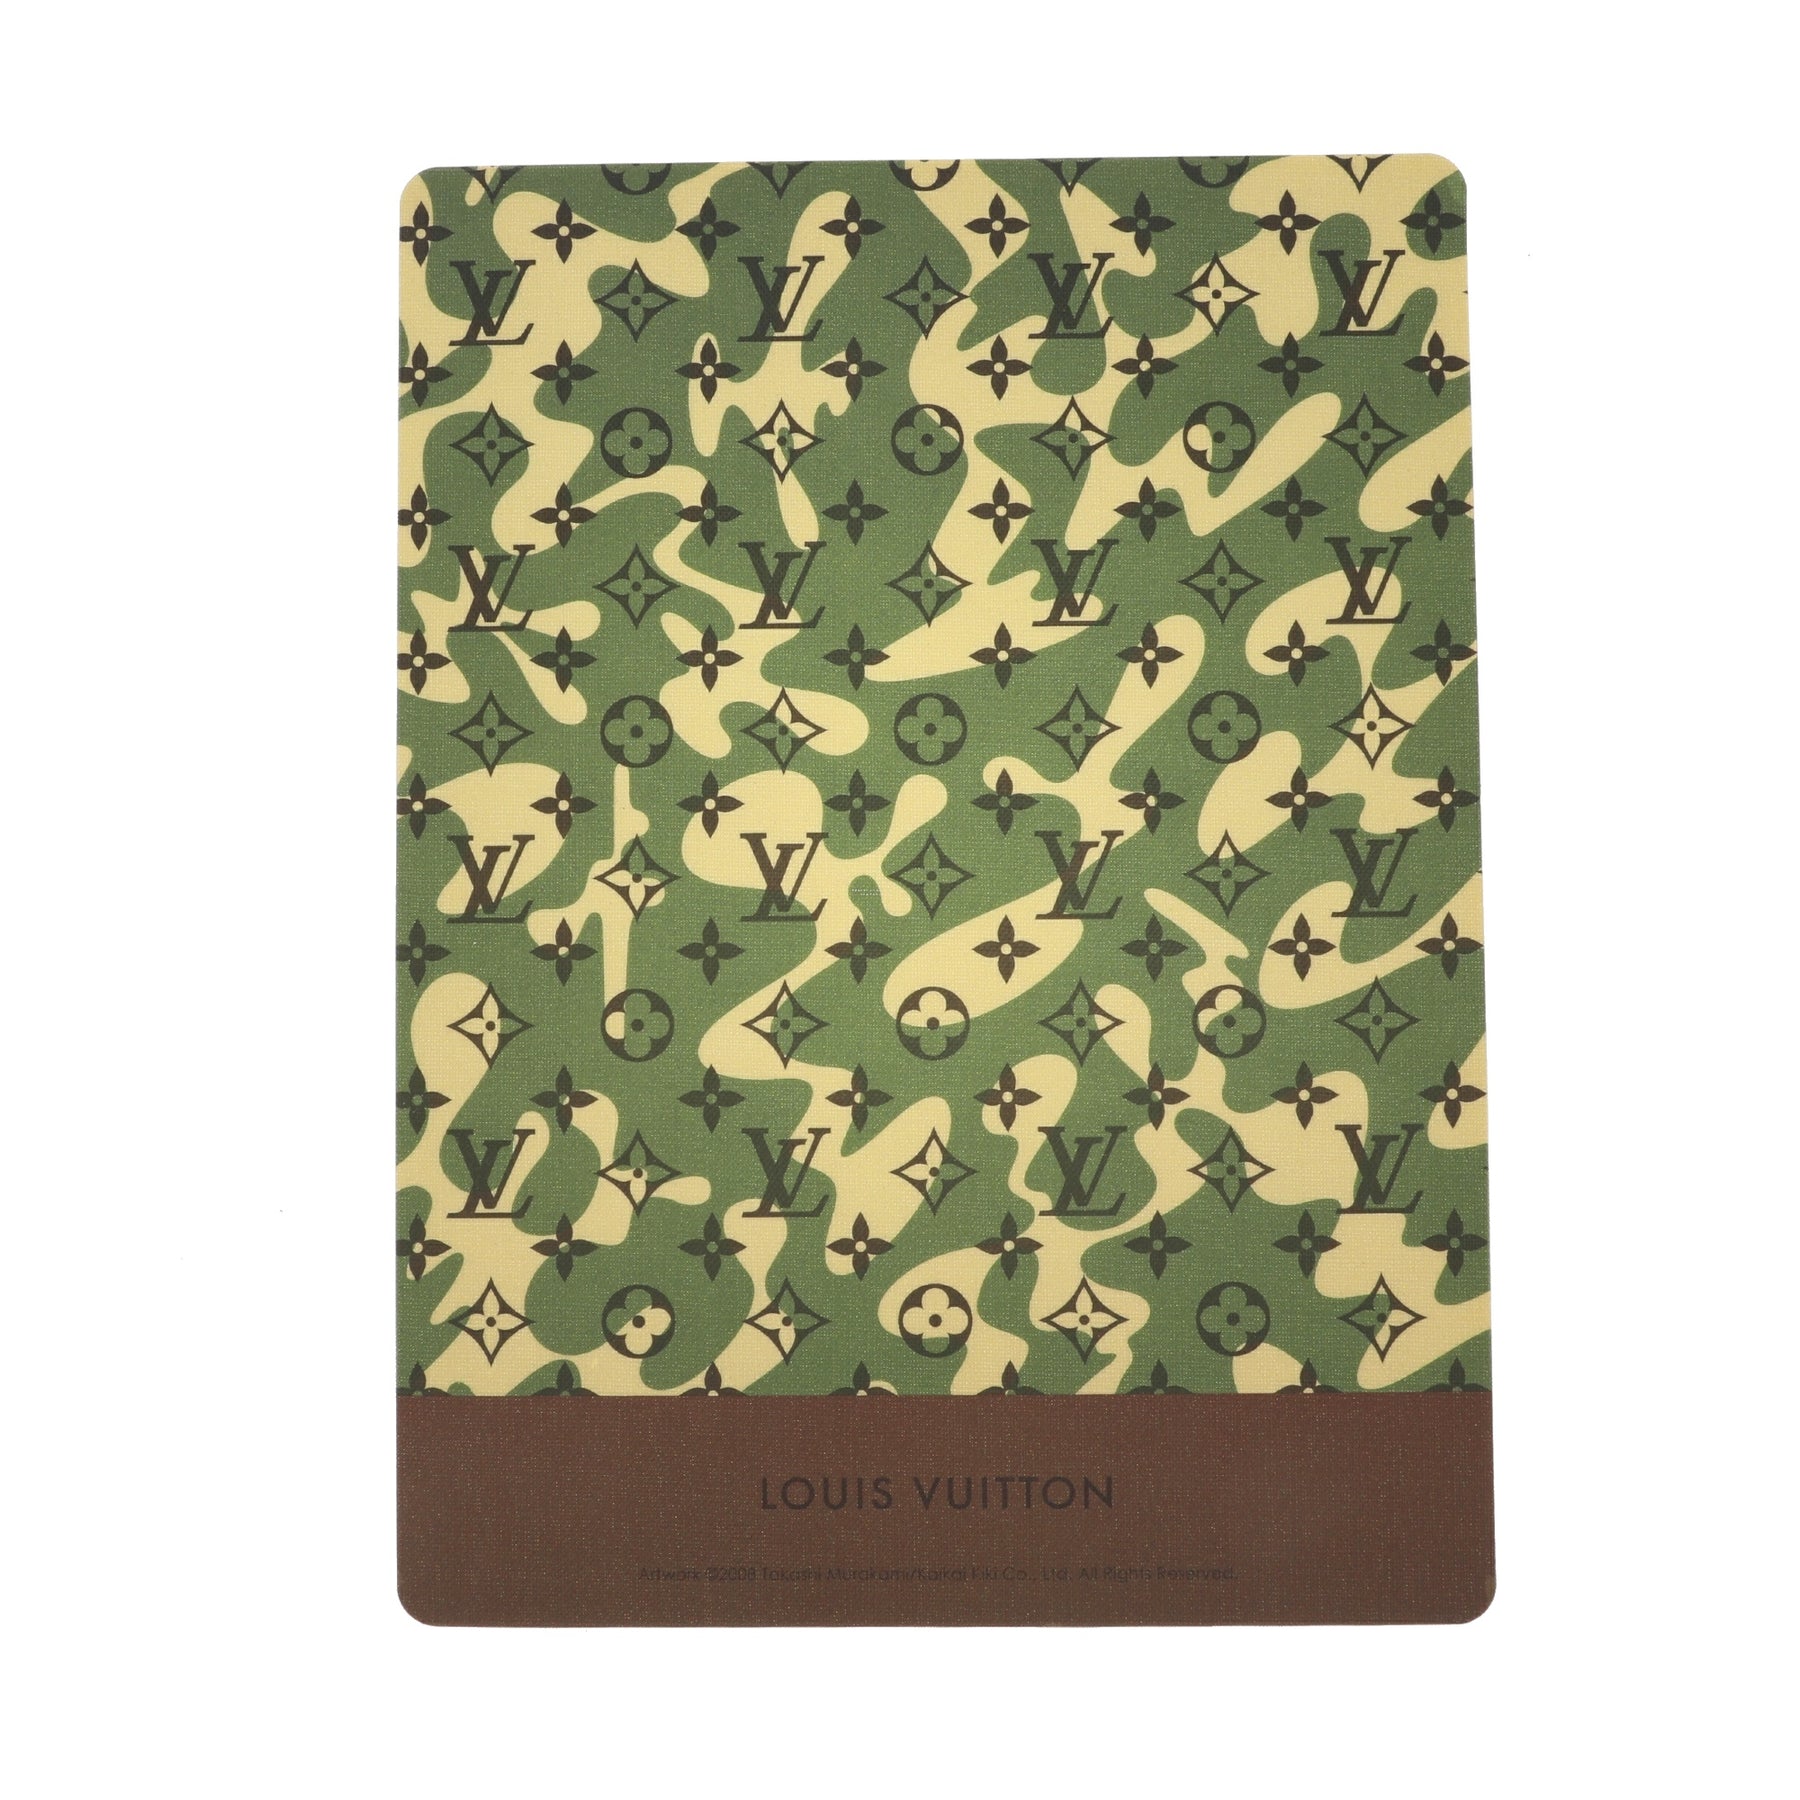 Limited Edition Louis Vuitton x Takashi Murakami Camo Mouse Pad – Fancy Lux